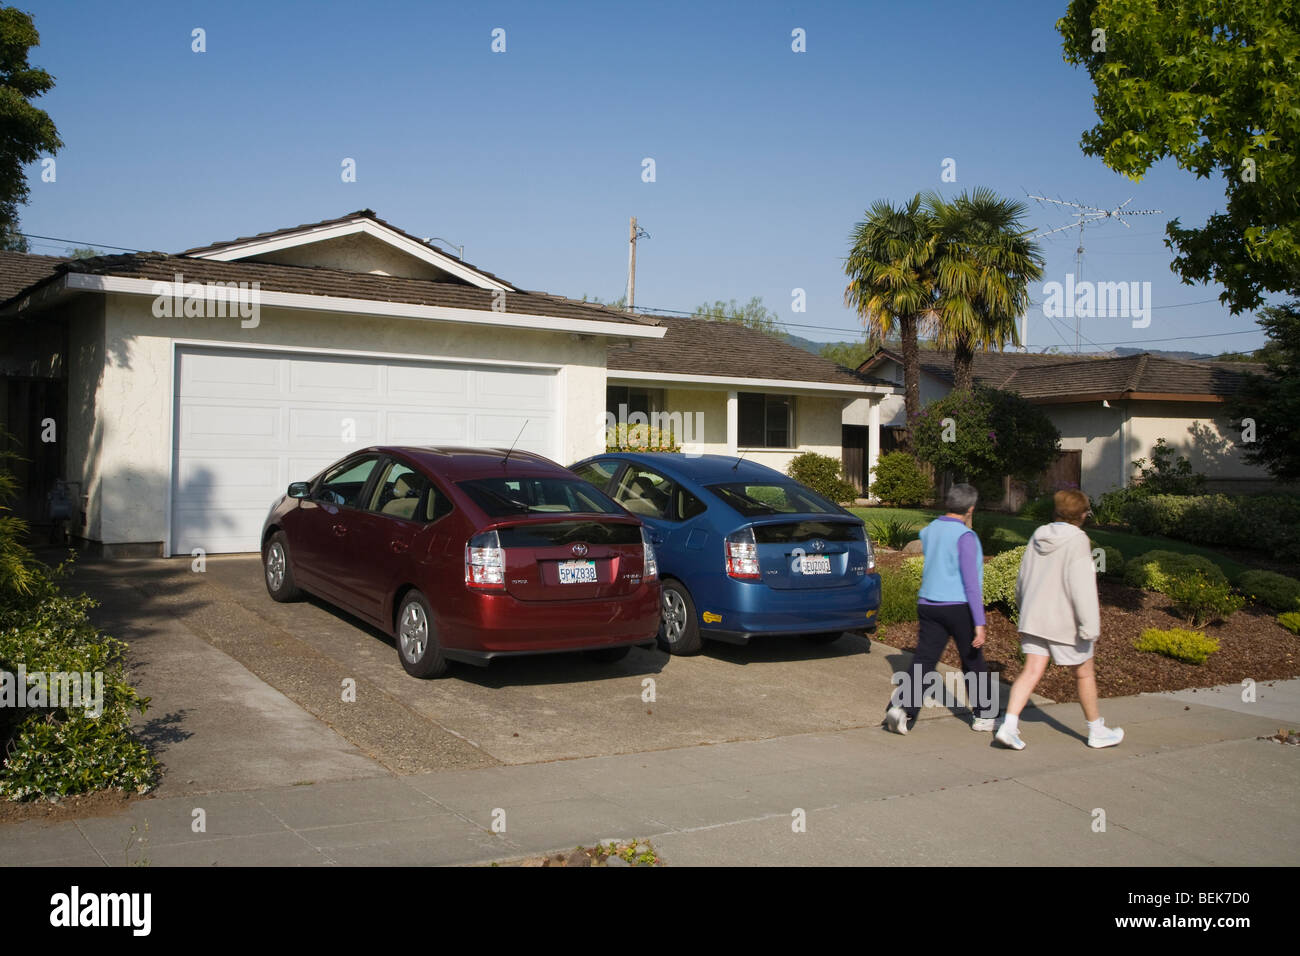 Two people passing two Toyota Prius hybrid cars which are parked in driveway. Cupertino, California, USA Stock Photo